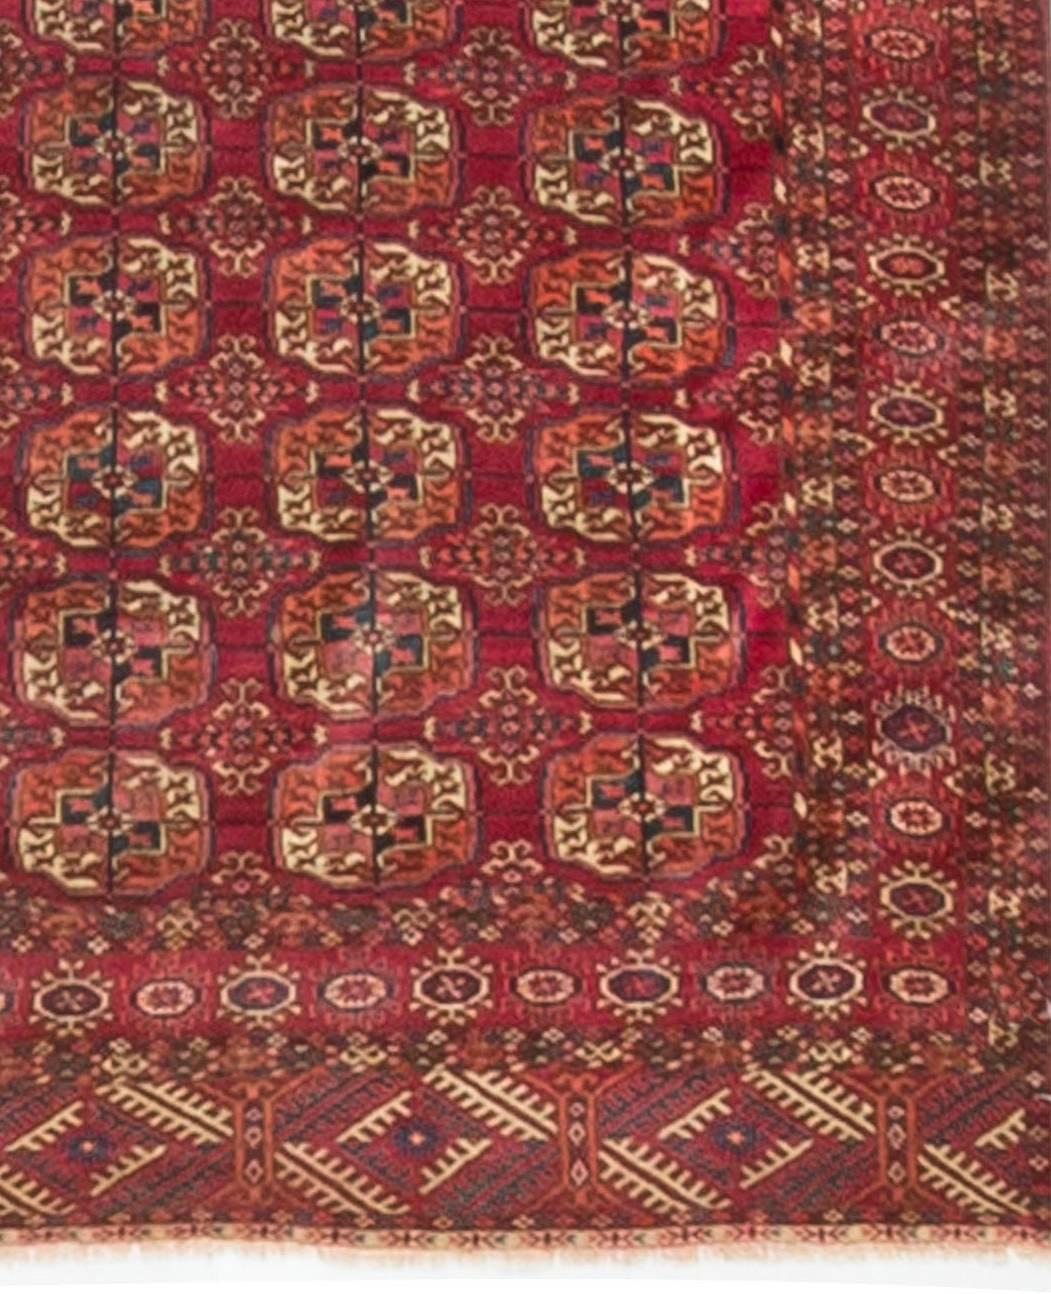 Antique Tekke Bokhara Rug, circa 1890. Bokara or Bokhara rugs are named after the city where they were sold. These rugs were made by Turkoman tribes, and these weavers gave the rug its distinctive design. At the end of the 20th century, carpet